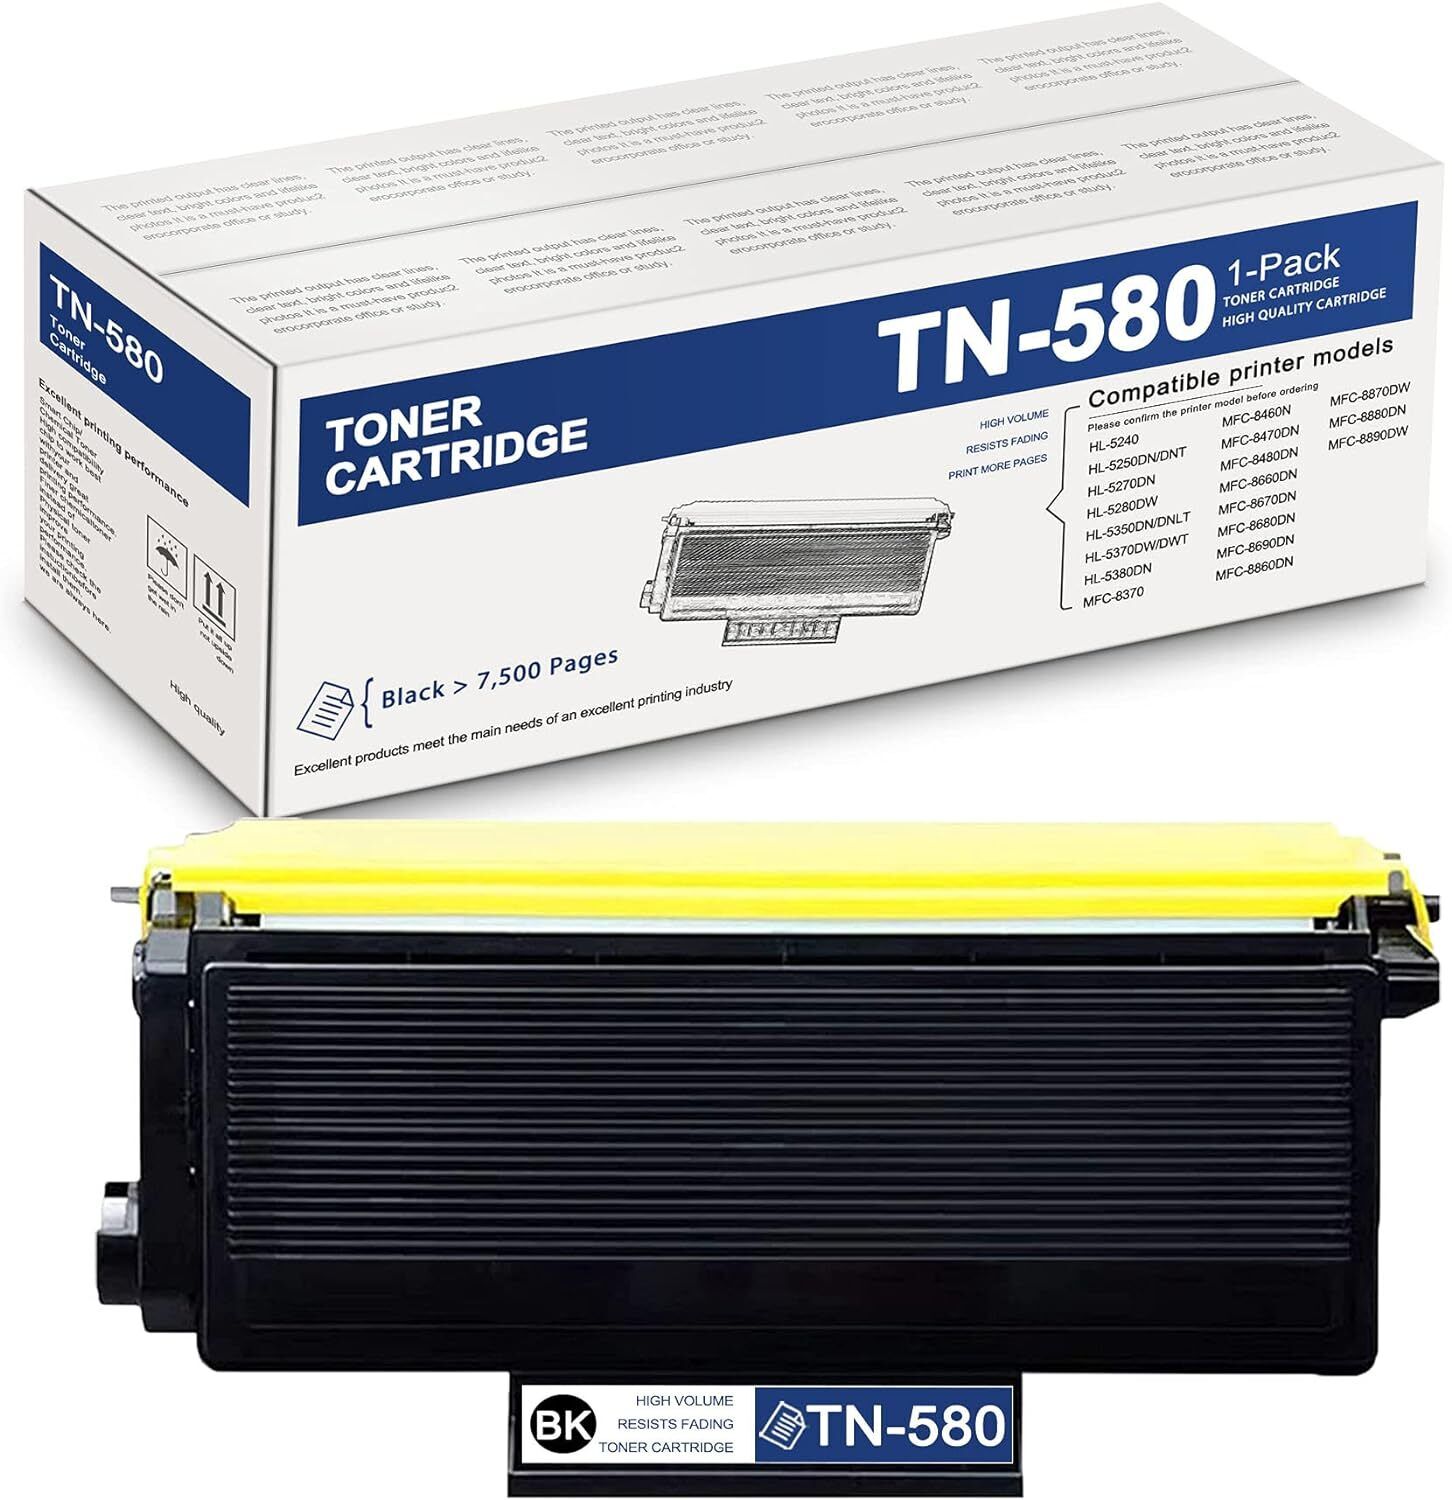 TN580 Toner Cartridge Replacement for Brother HL-5240 HL-5270DN Printer Black